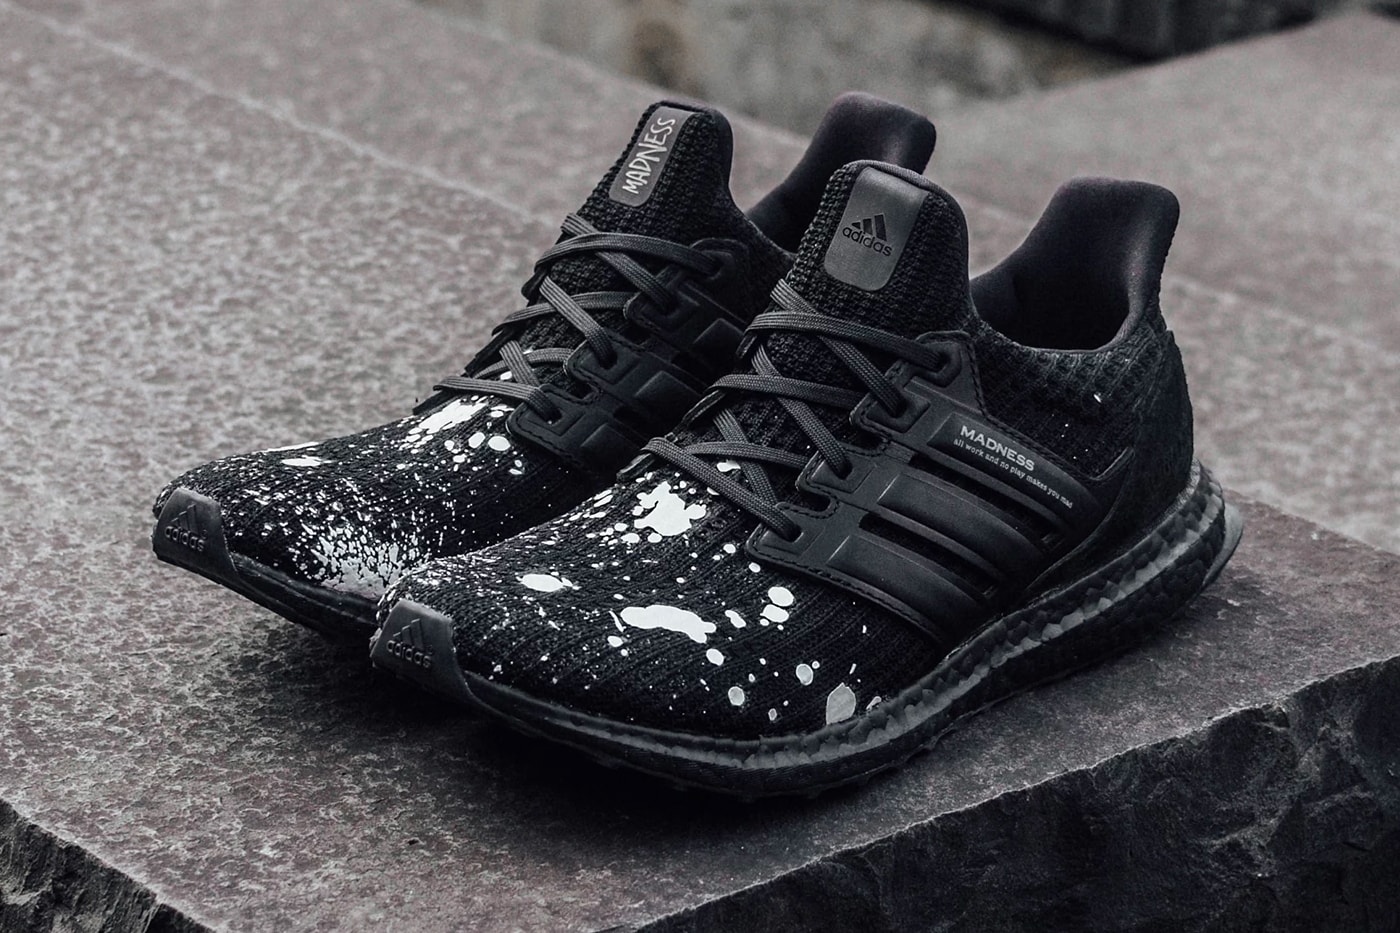 MADNESS x adidas UltraBOOST 4.0 Release Date